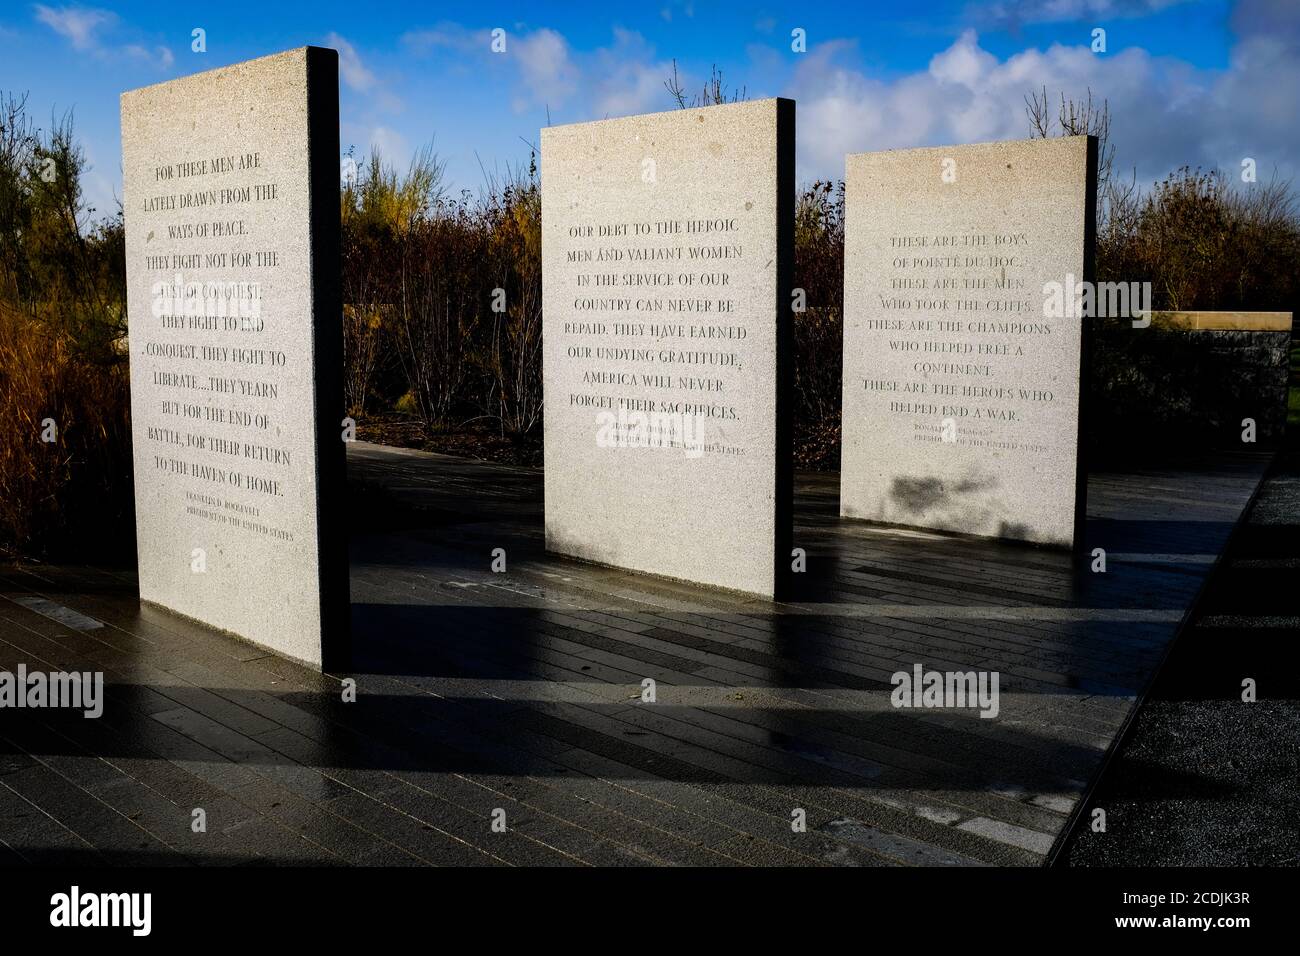 Quotes from three US presidents at Pointe du Hoc, Normandy, France, site of US Army ranger assault on cliffs during D-Day. Stock Photo